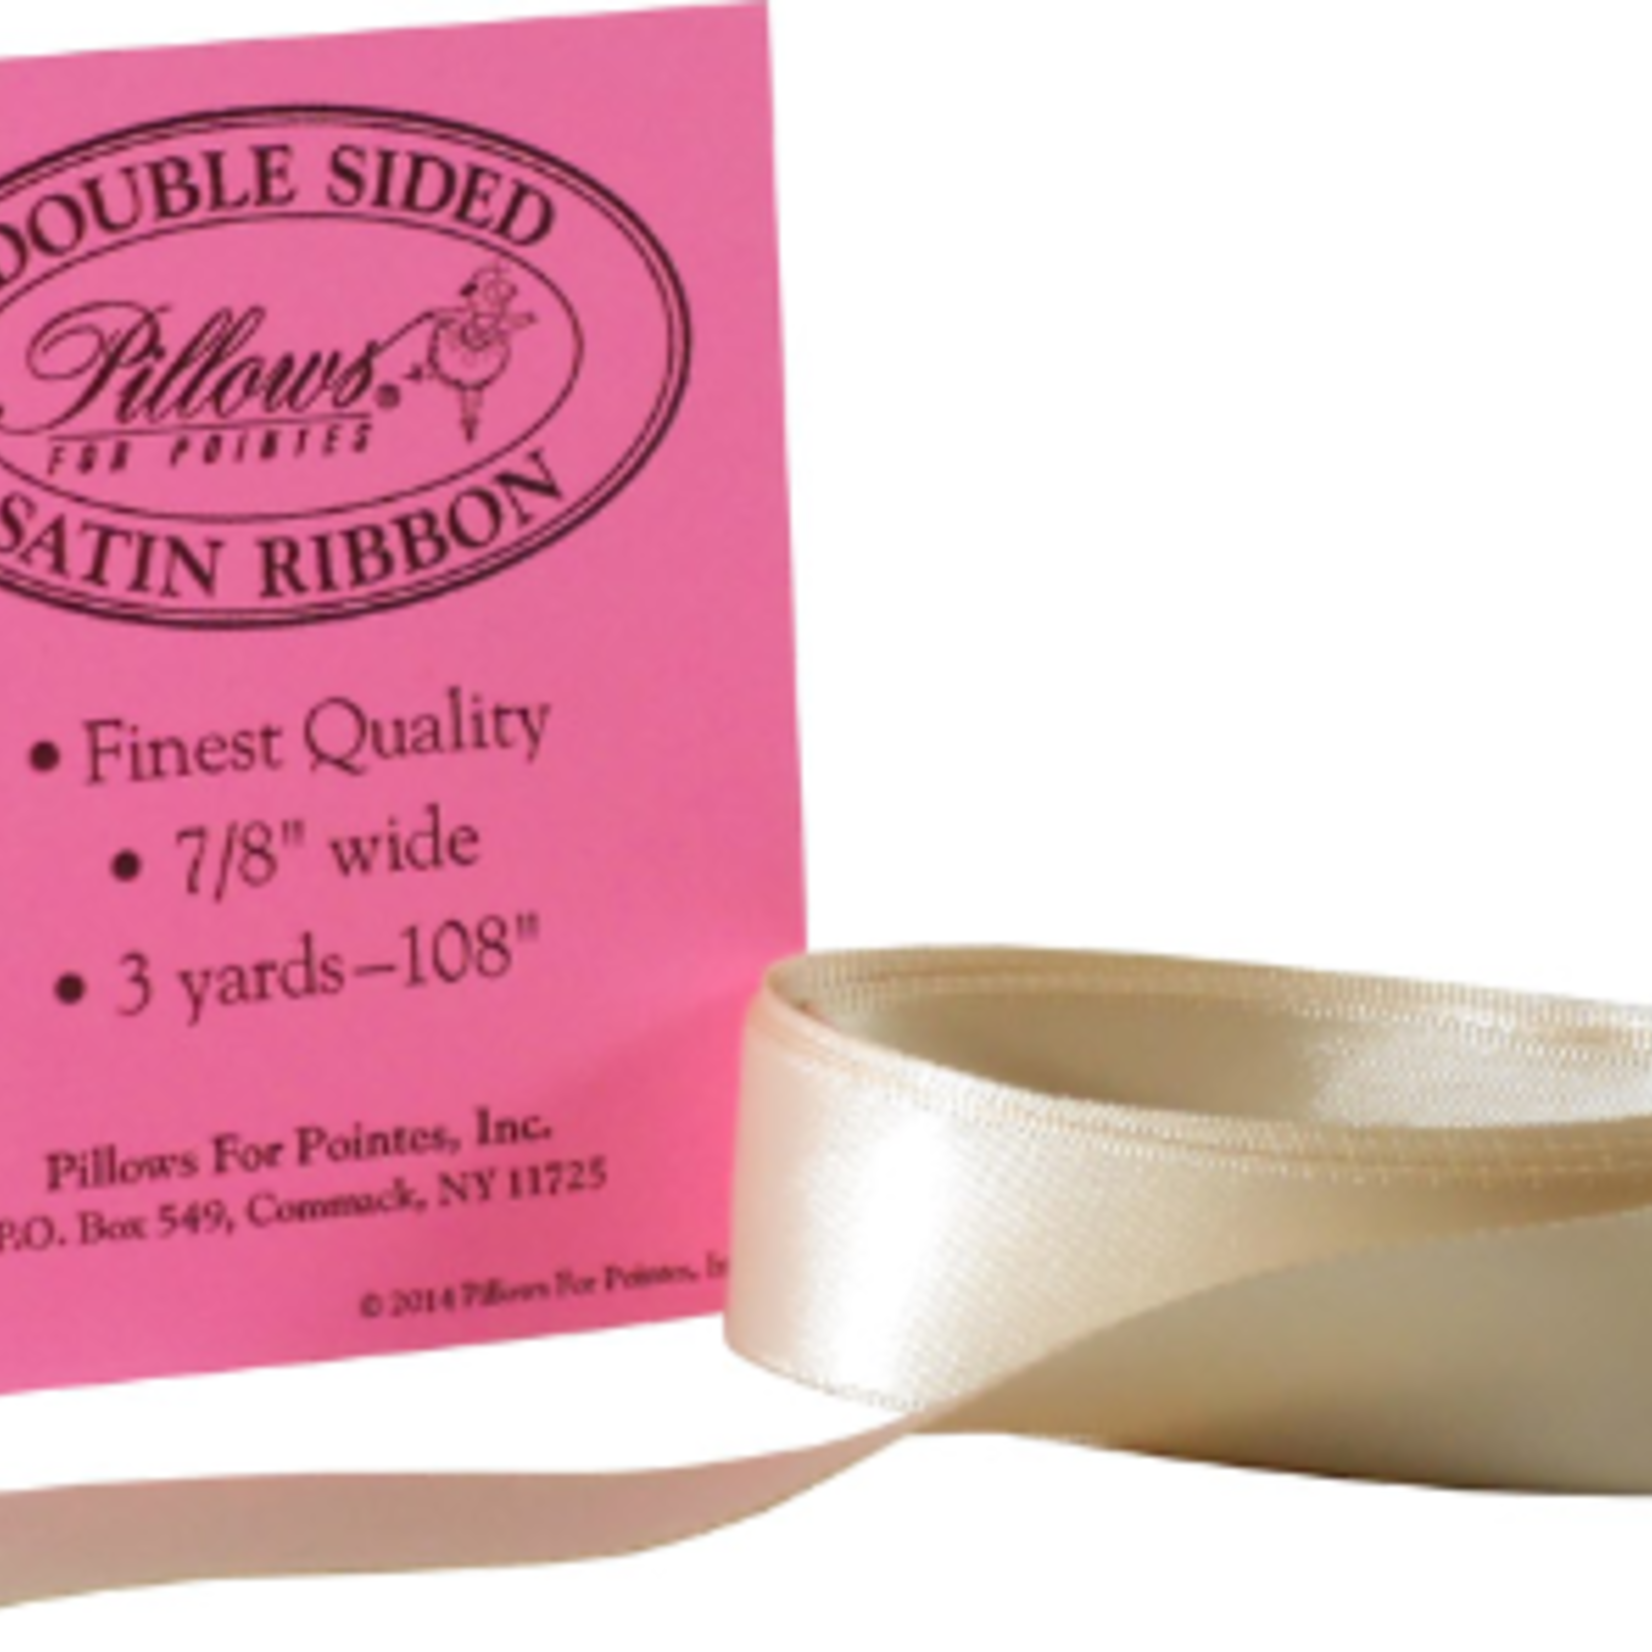 Pillows for Pointes Pillows for Pointes Double Sided Satin Ribbon